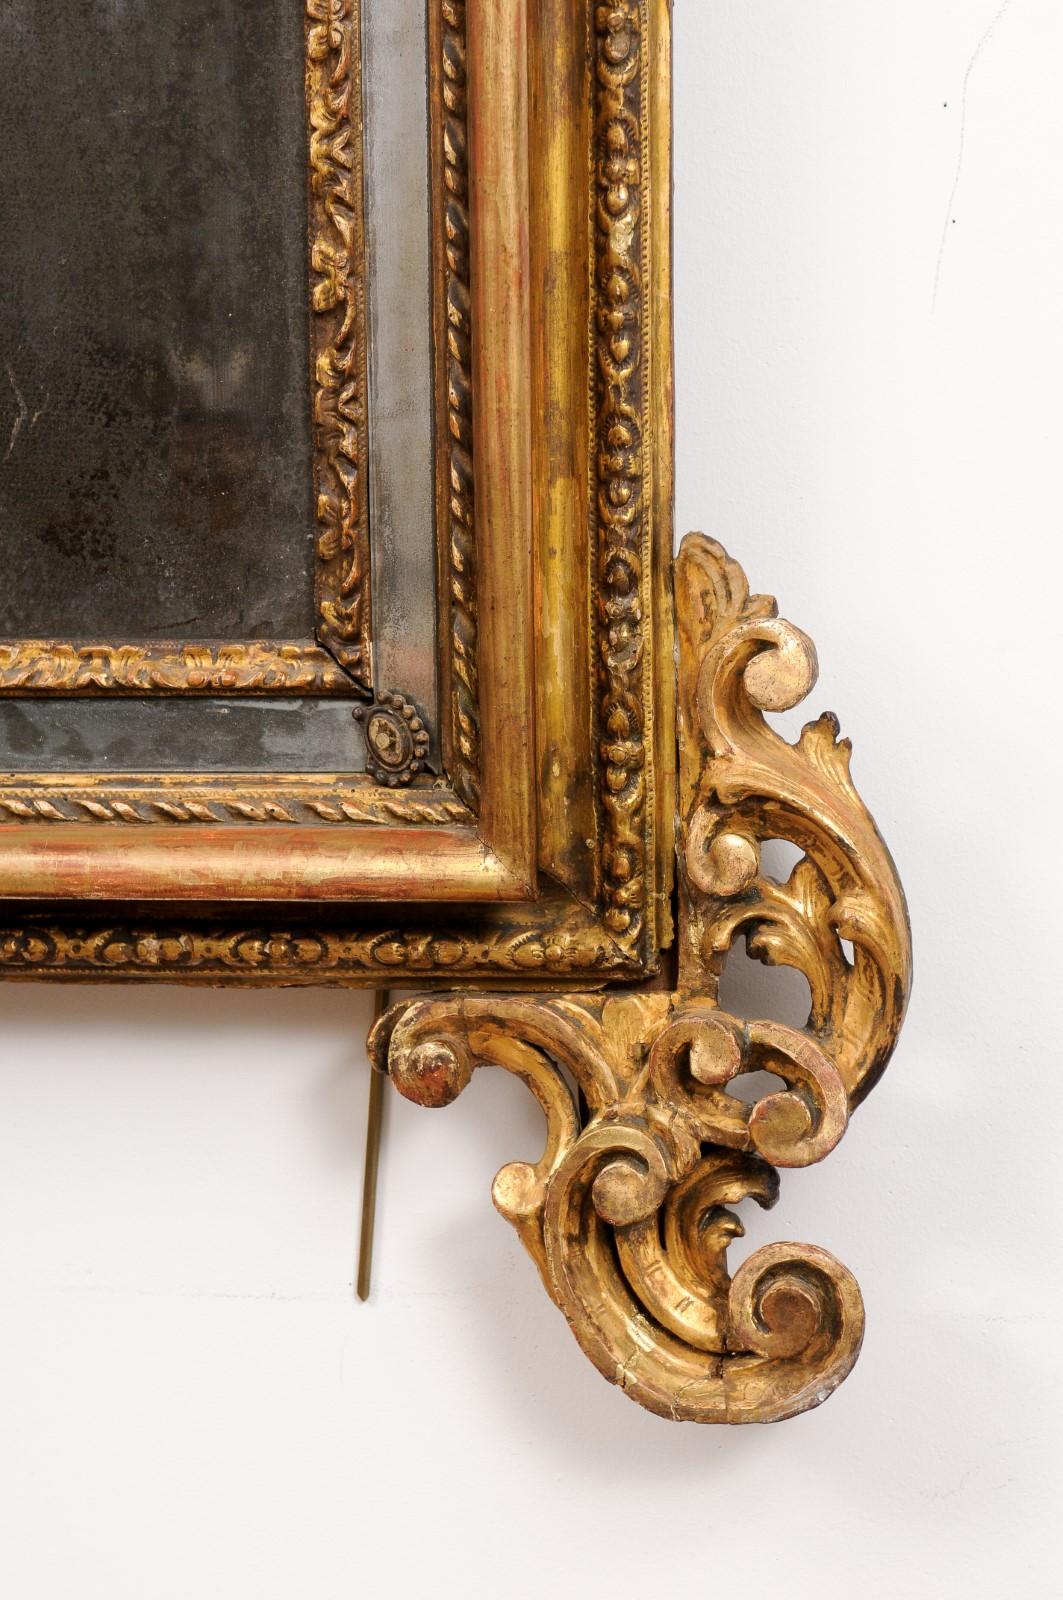 Large 18th Century Italian Rococo Giltwood Mirror with Pagoda Top For Sale 4